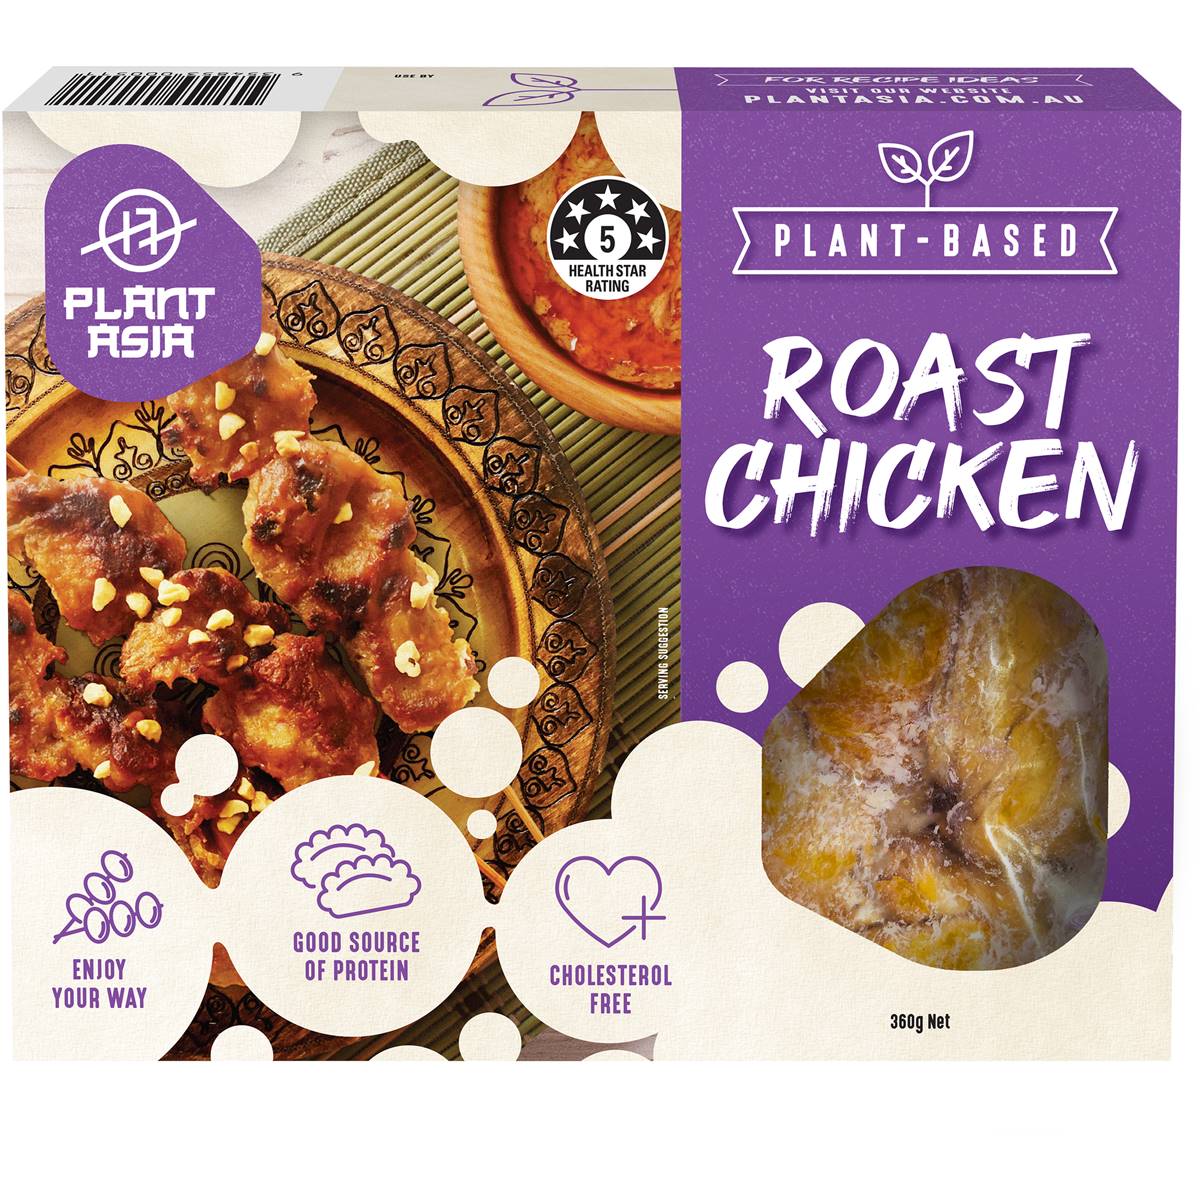 Calories in Plant Asia Plant Based Roast Chicken